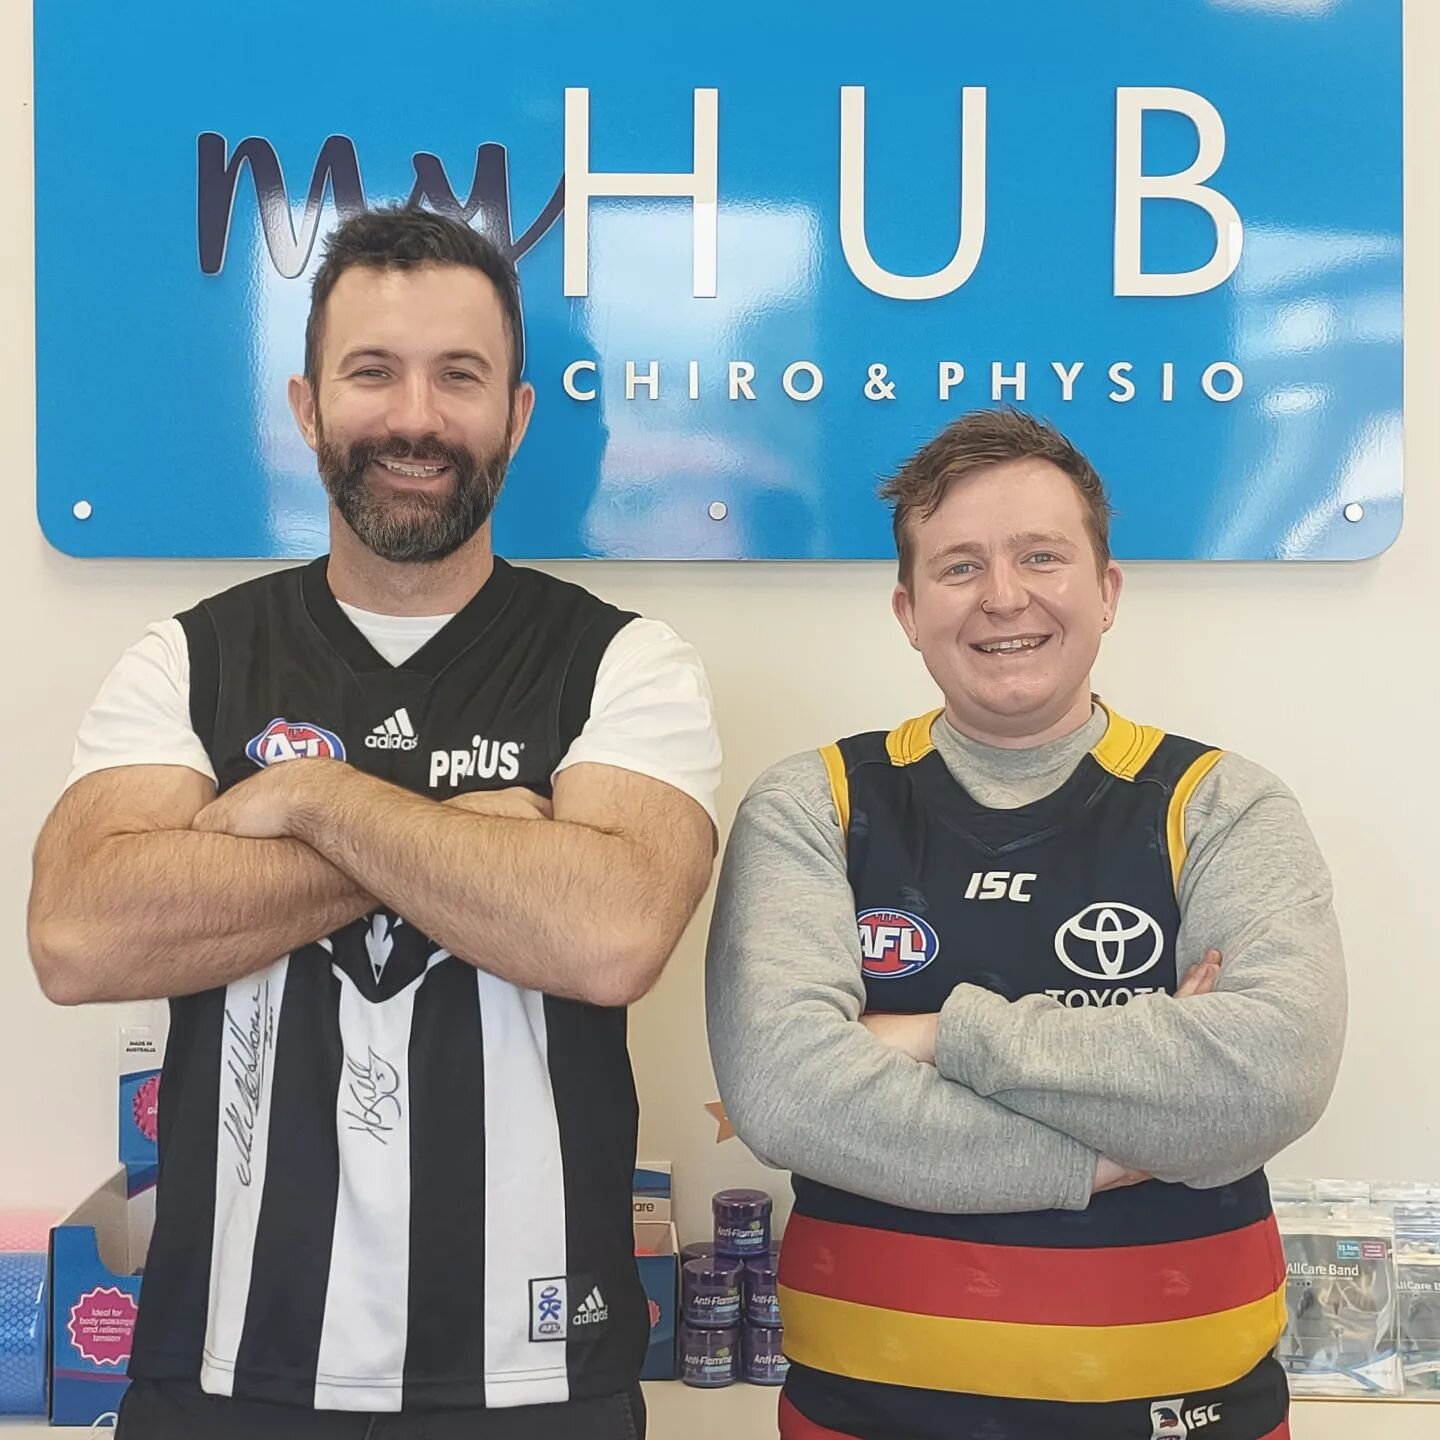 🖤🤍🖤 SHARE TO WIN! 💙💛❤️

We have two GA tix to the CROWS vs COLLINGWOOD game this weekend! 

SHARE this photo and TAG us in your story for your chance to win!

Winner announced this Friday at midday 🤝